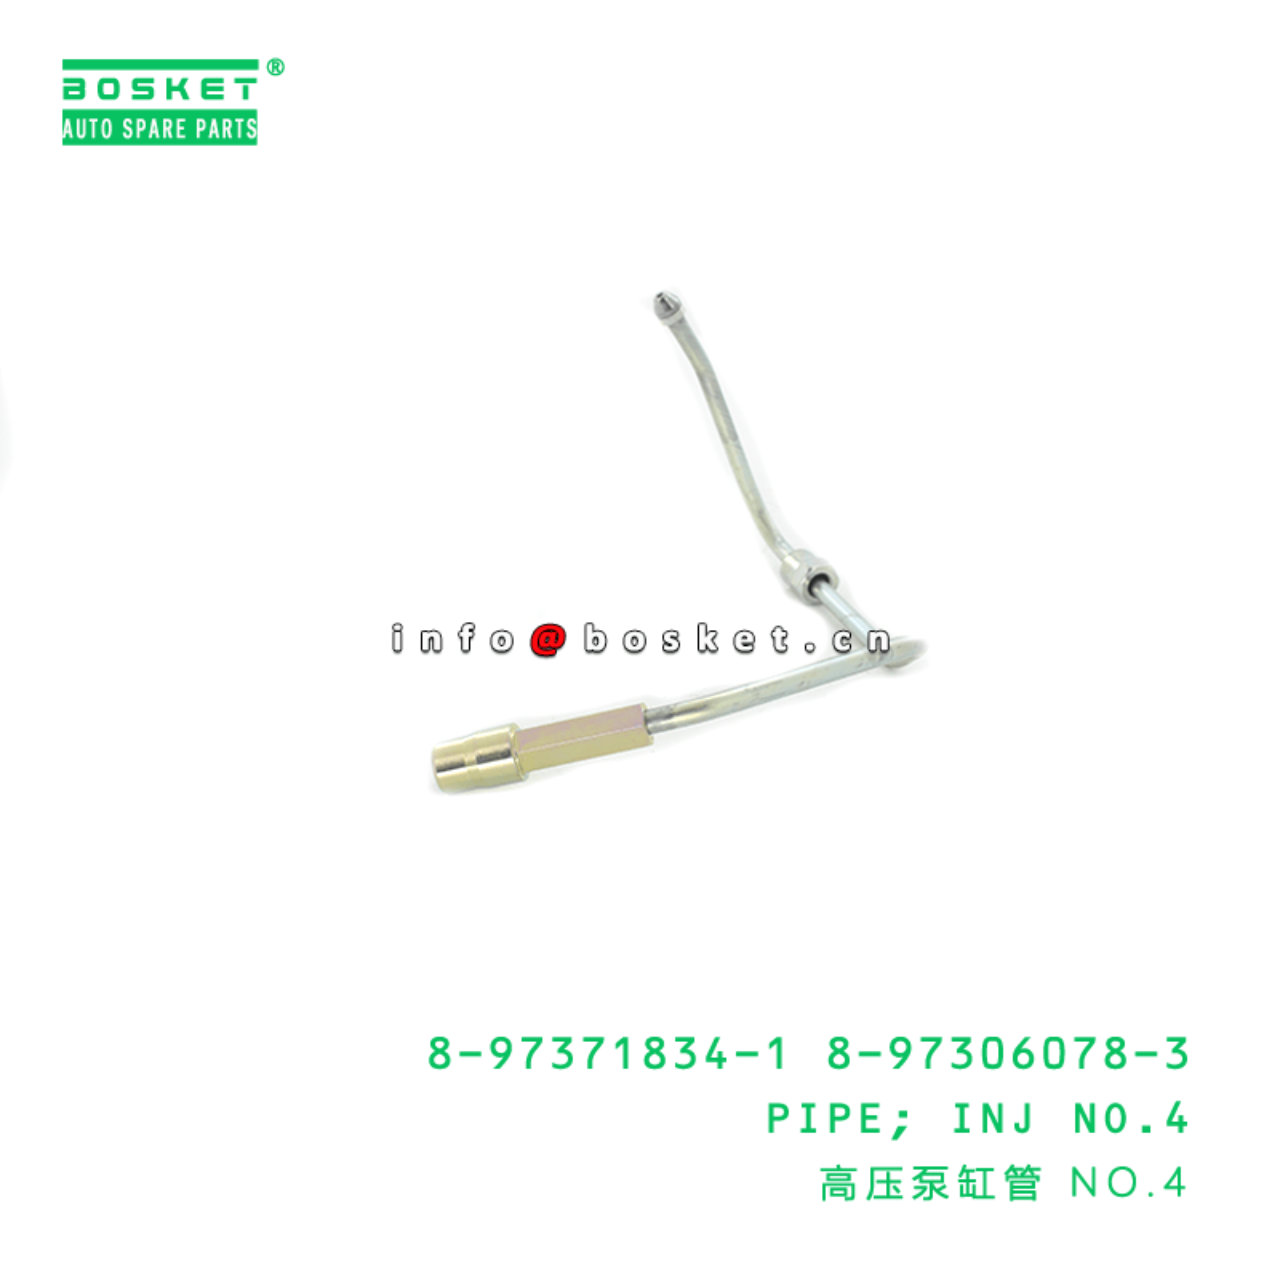 8-97371834-1 8-97306078-3 Injection No.4 Pipe 8973718341 8973060783 Suitable for ISUZU NPR 4HK1